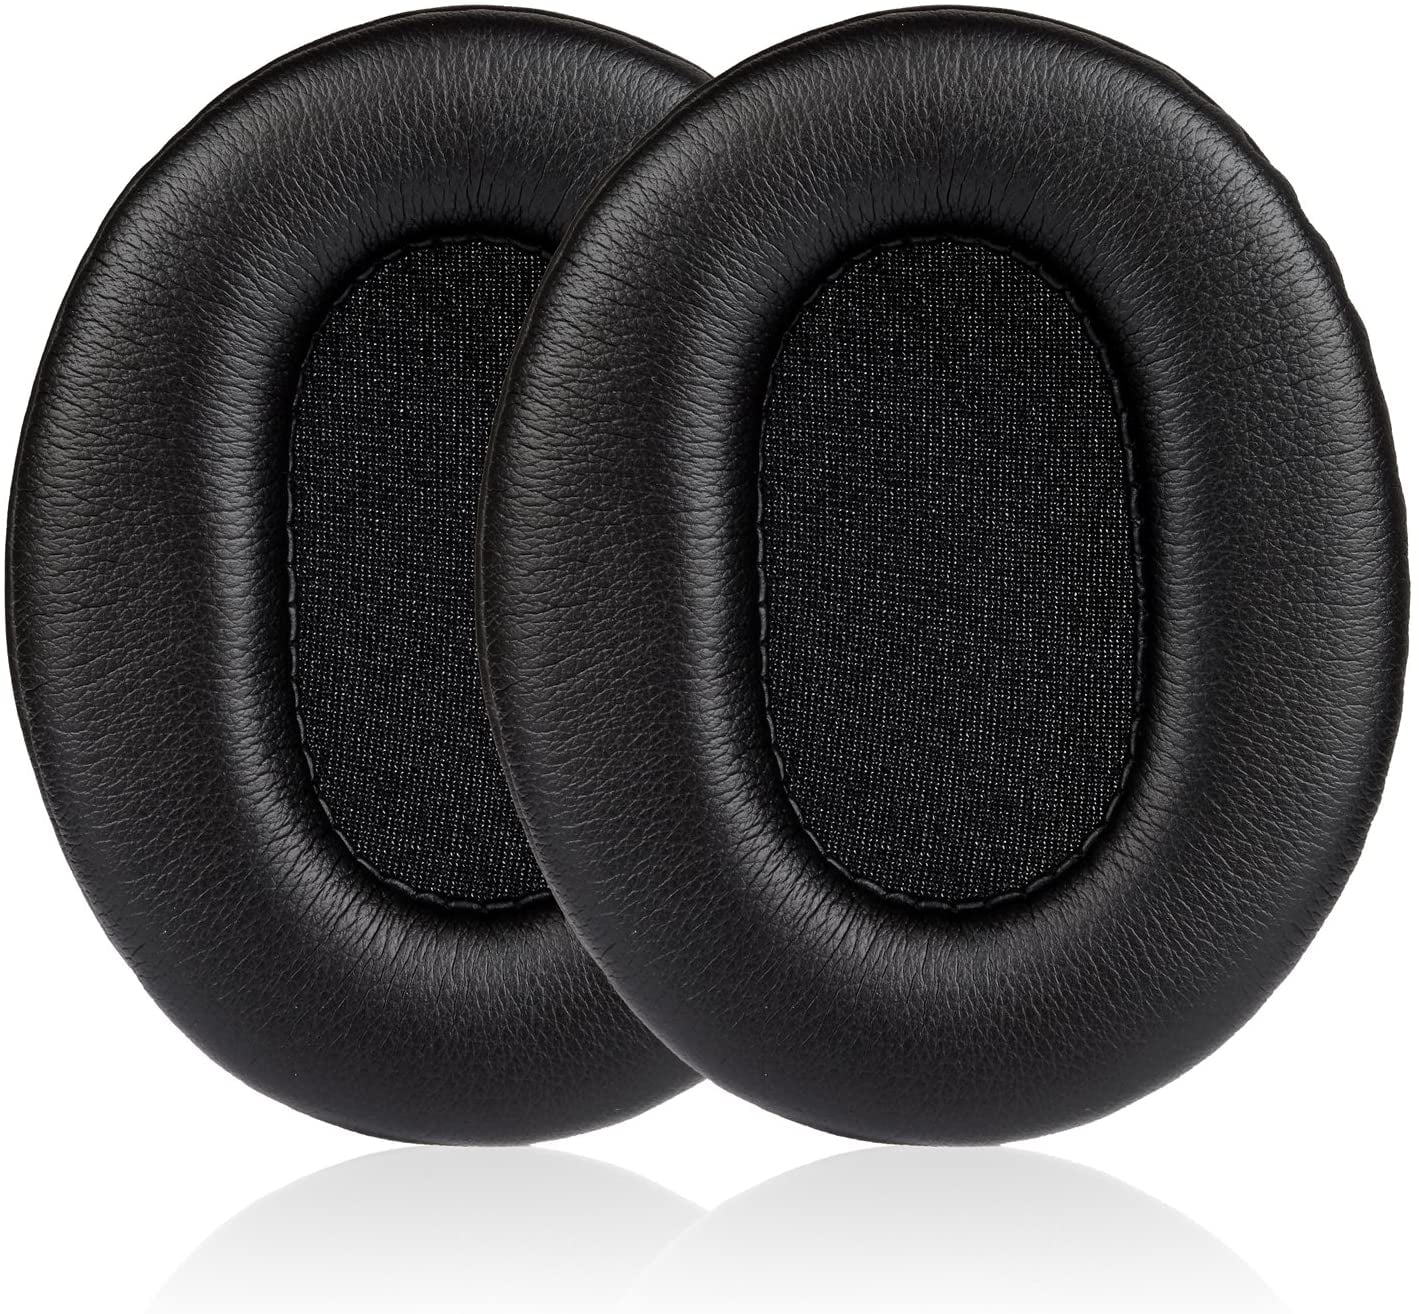 Ear pads Cushion Replacement for Audio Technica ATH-M50 M50S M20 M30 ATH-SX1 